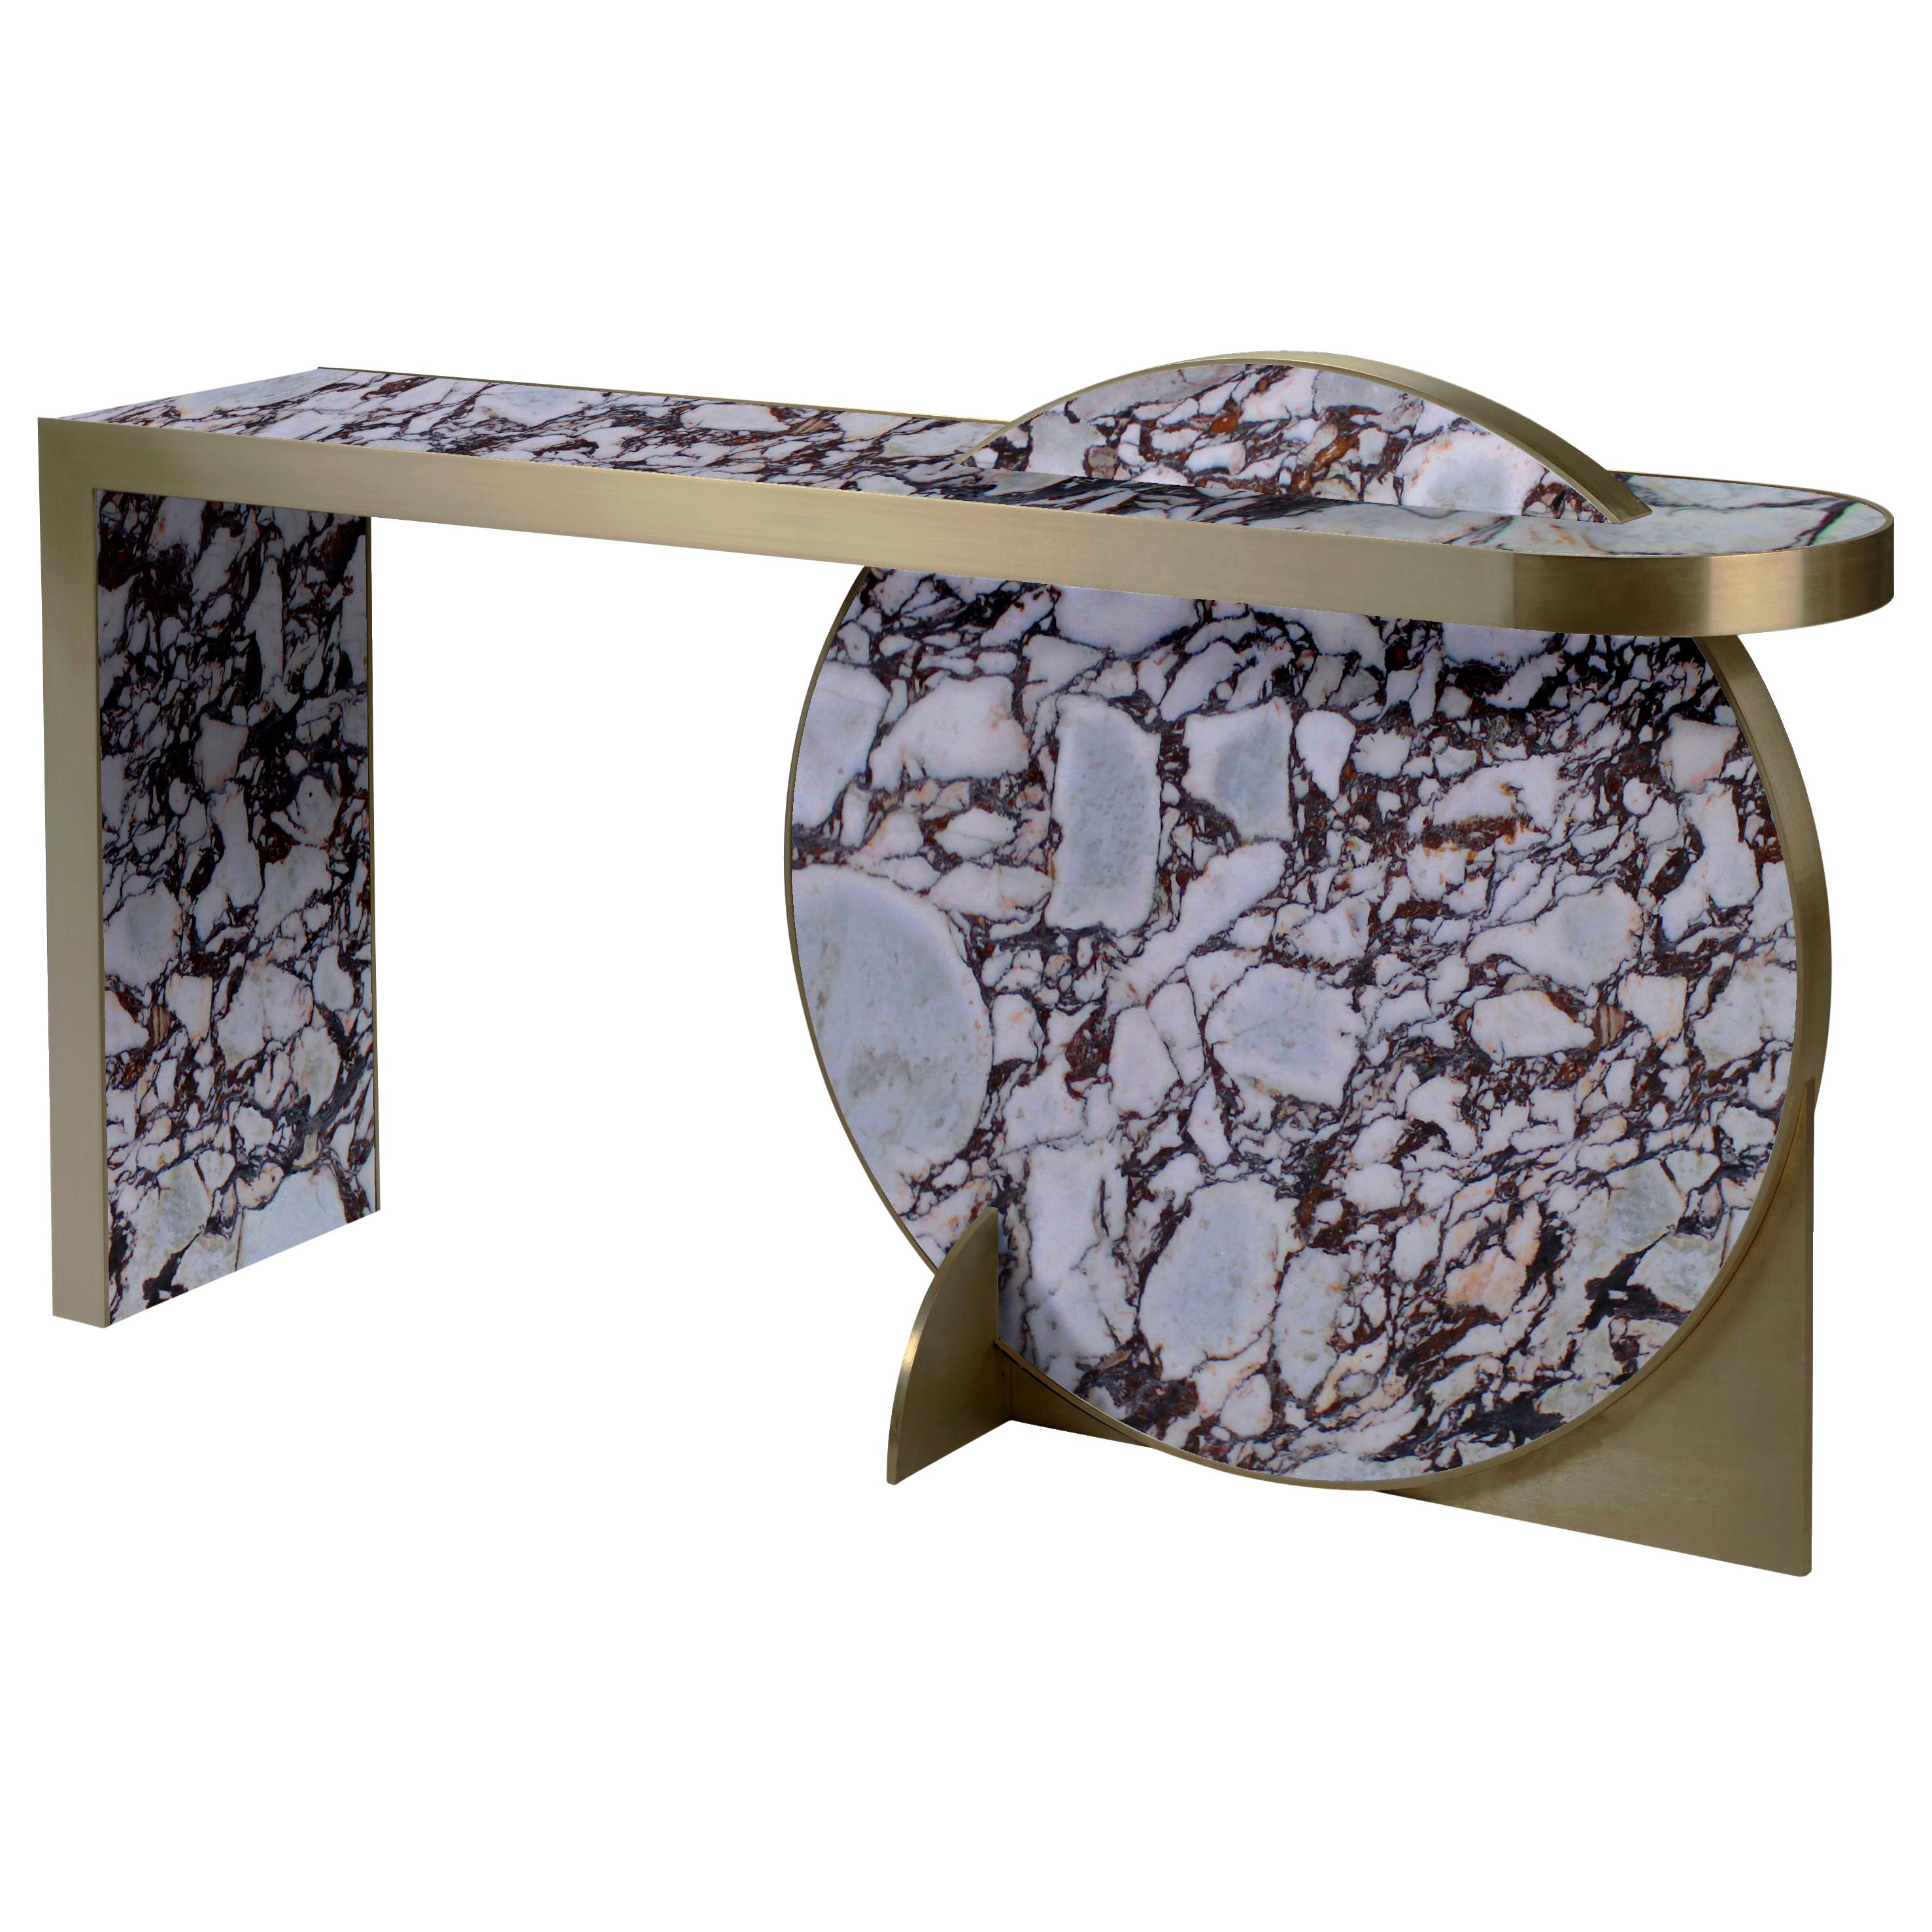 The Collision Console Carrara Marble and Brushed Brass, Viola, by Lara Bohinc